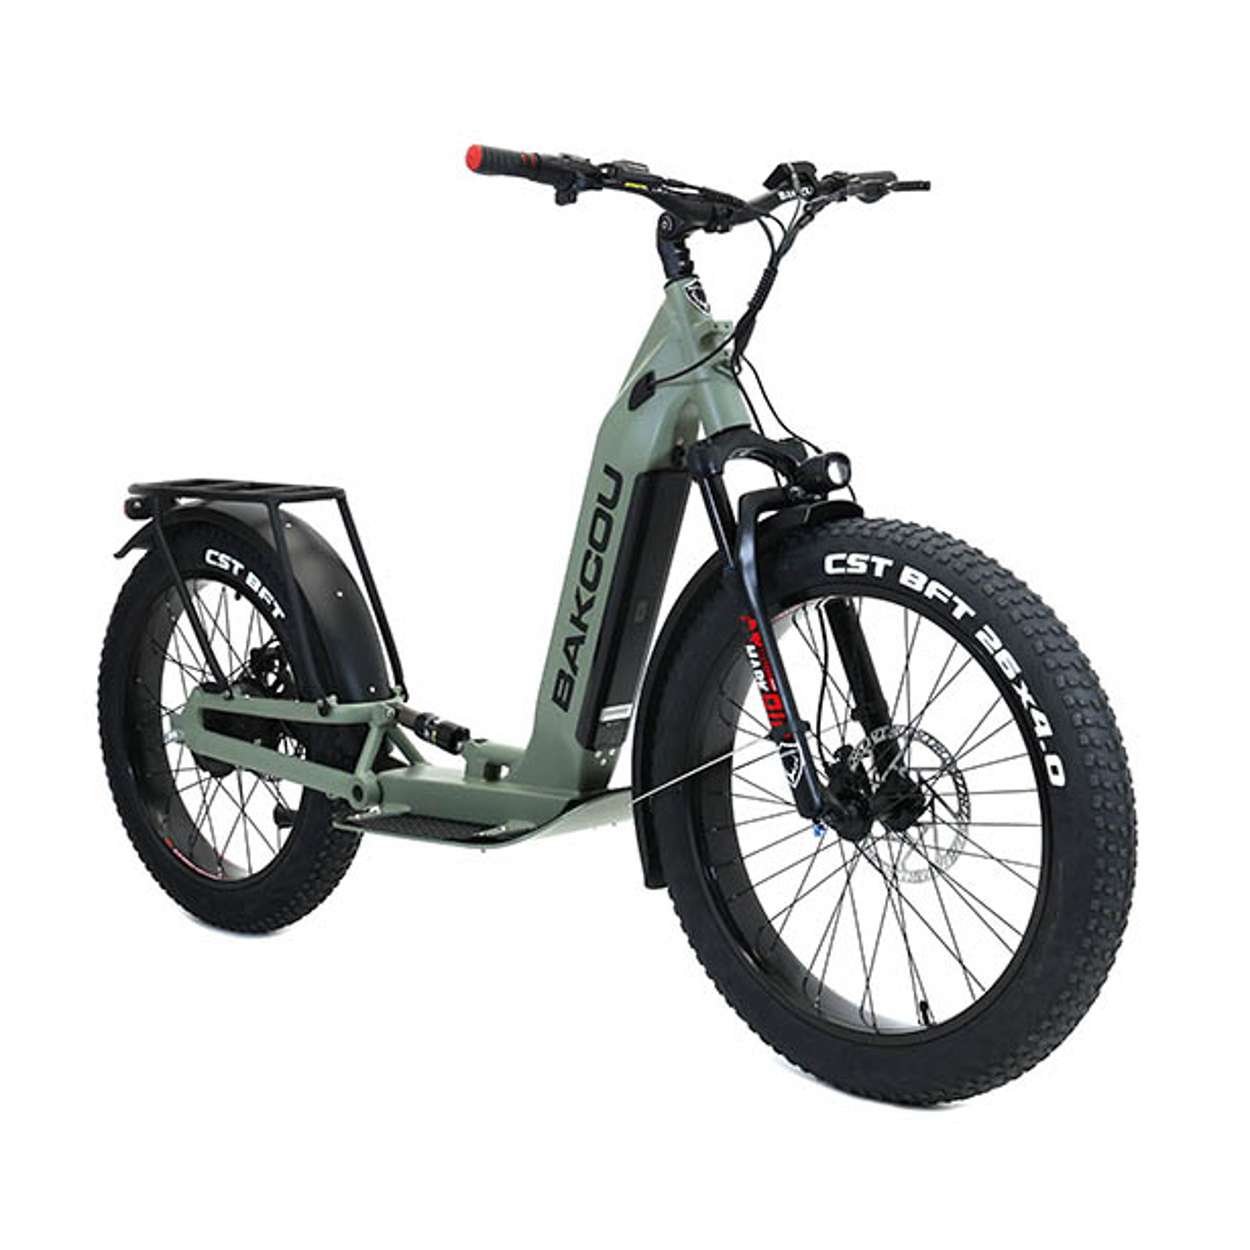 Bakcou Grizzly Electric Scooter Sage Green